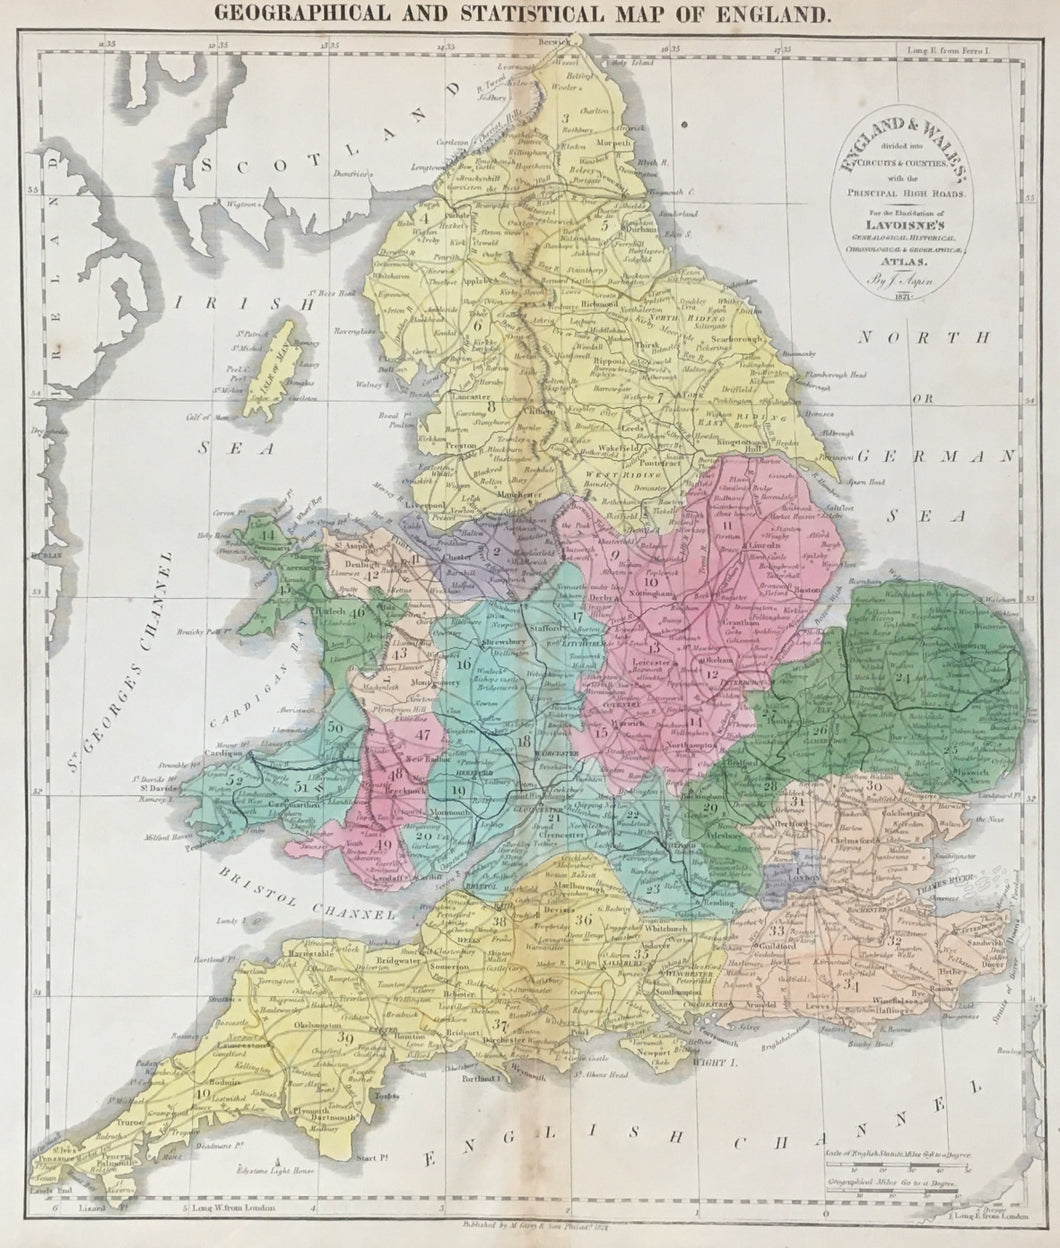 Gros, C. “England and Wales, . . . : Intended for the Elucidation of Lavoisne's Historical Atlas”